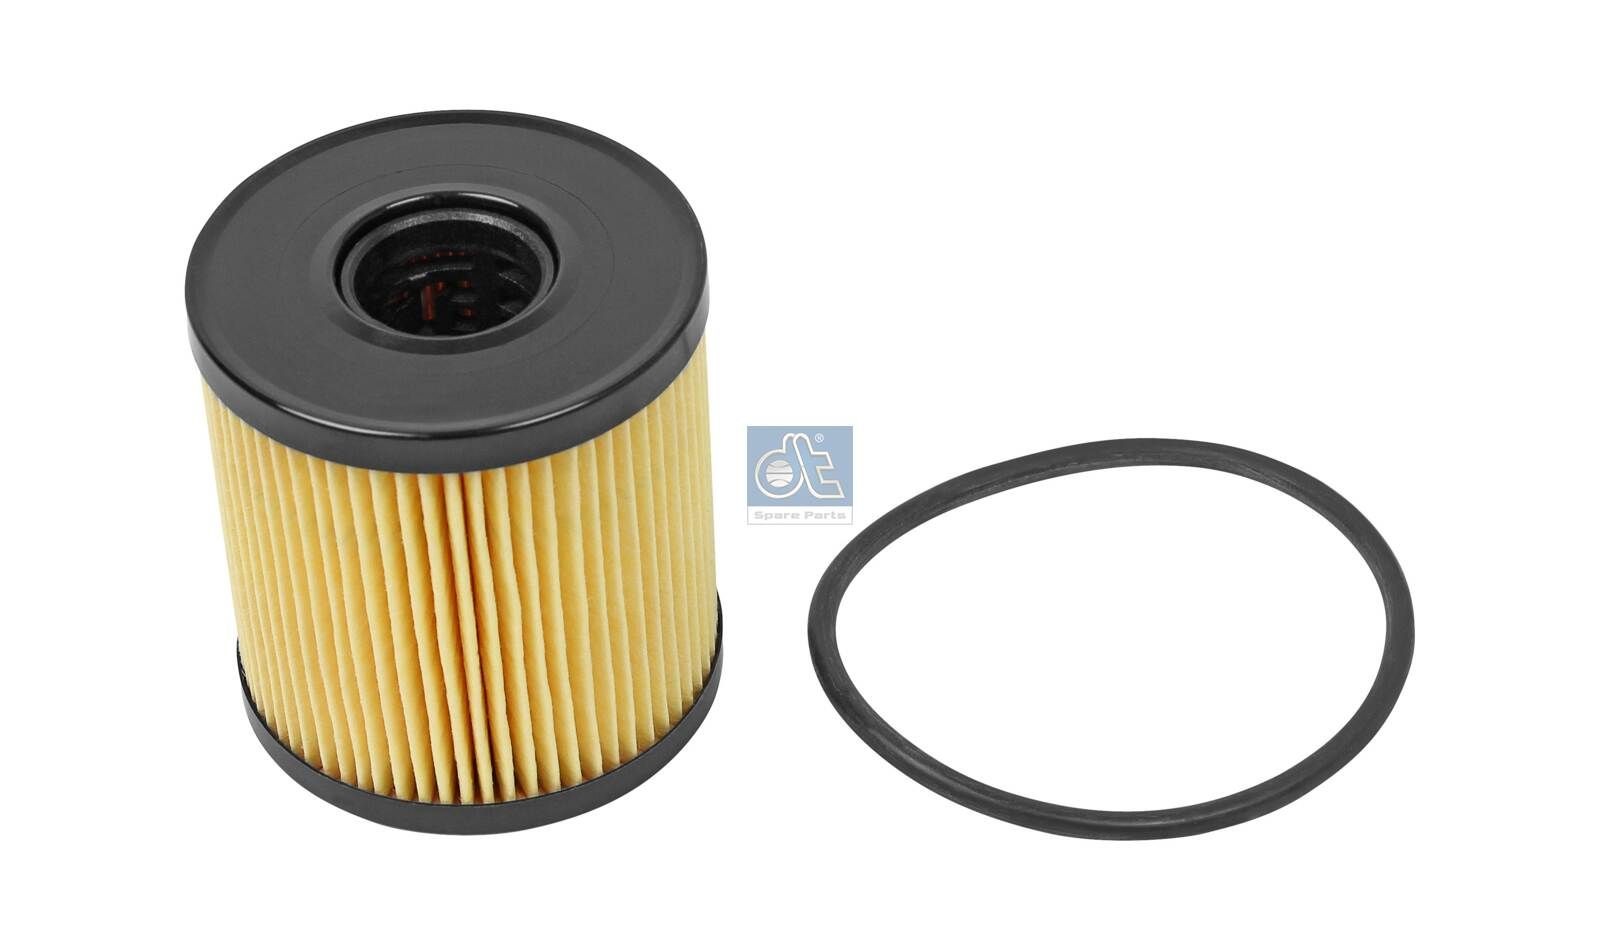 Original DT Spare Parts 1 457 429 249 Oil filters 12.16025 for FORD KUGA